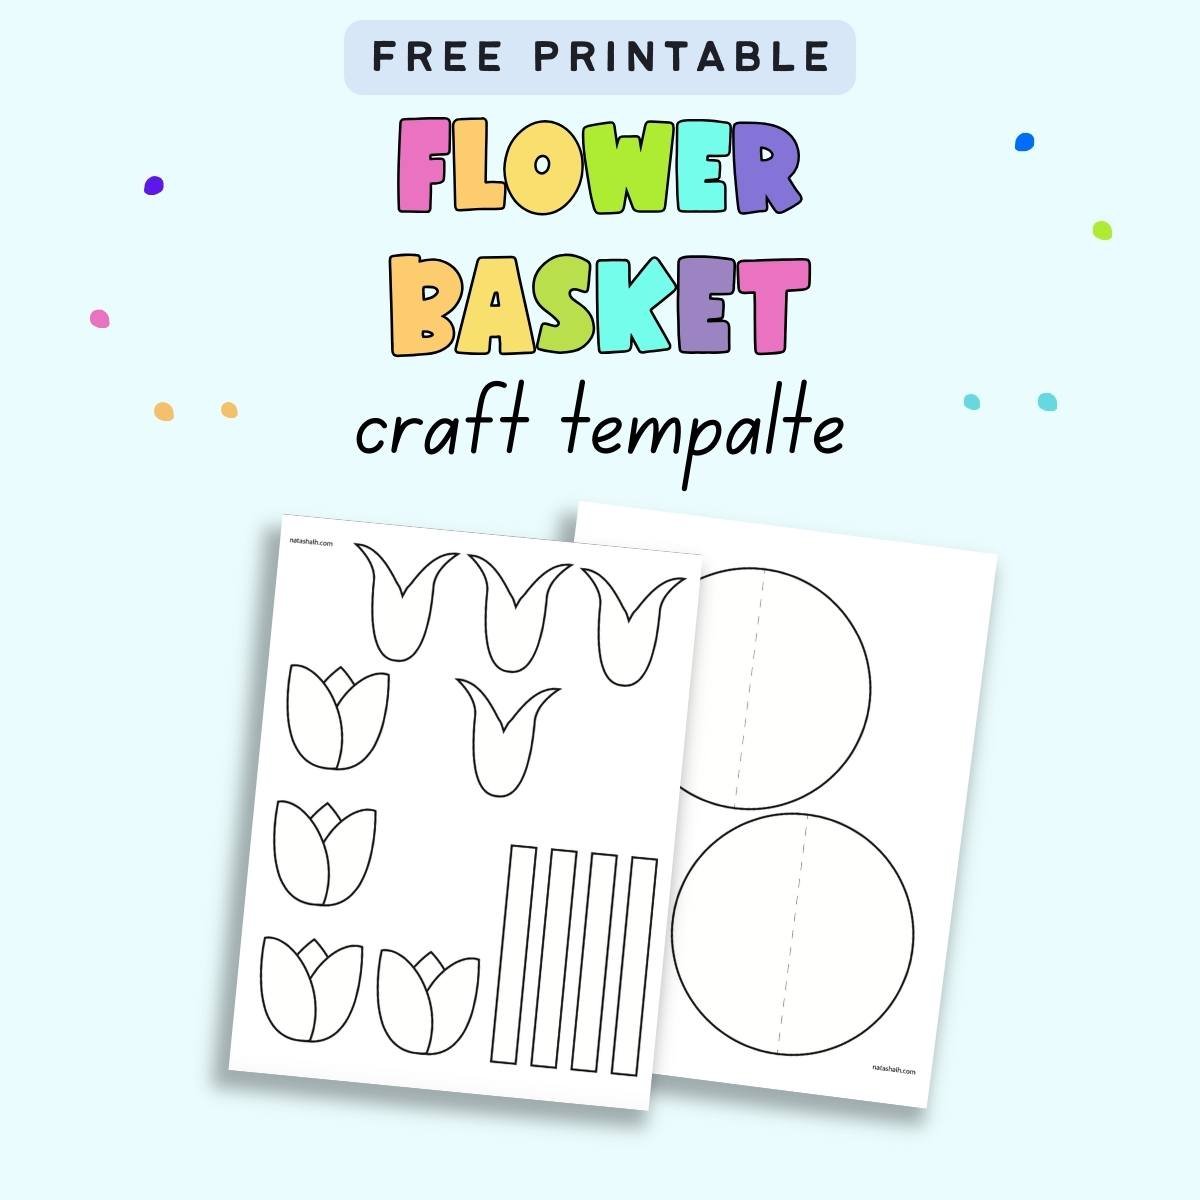 Text "free printable flower basket craft template" with two pages of craft template including tulips